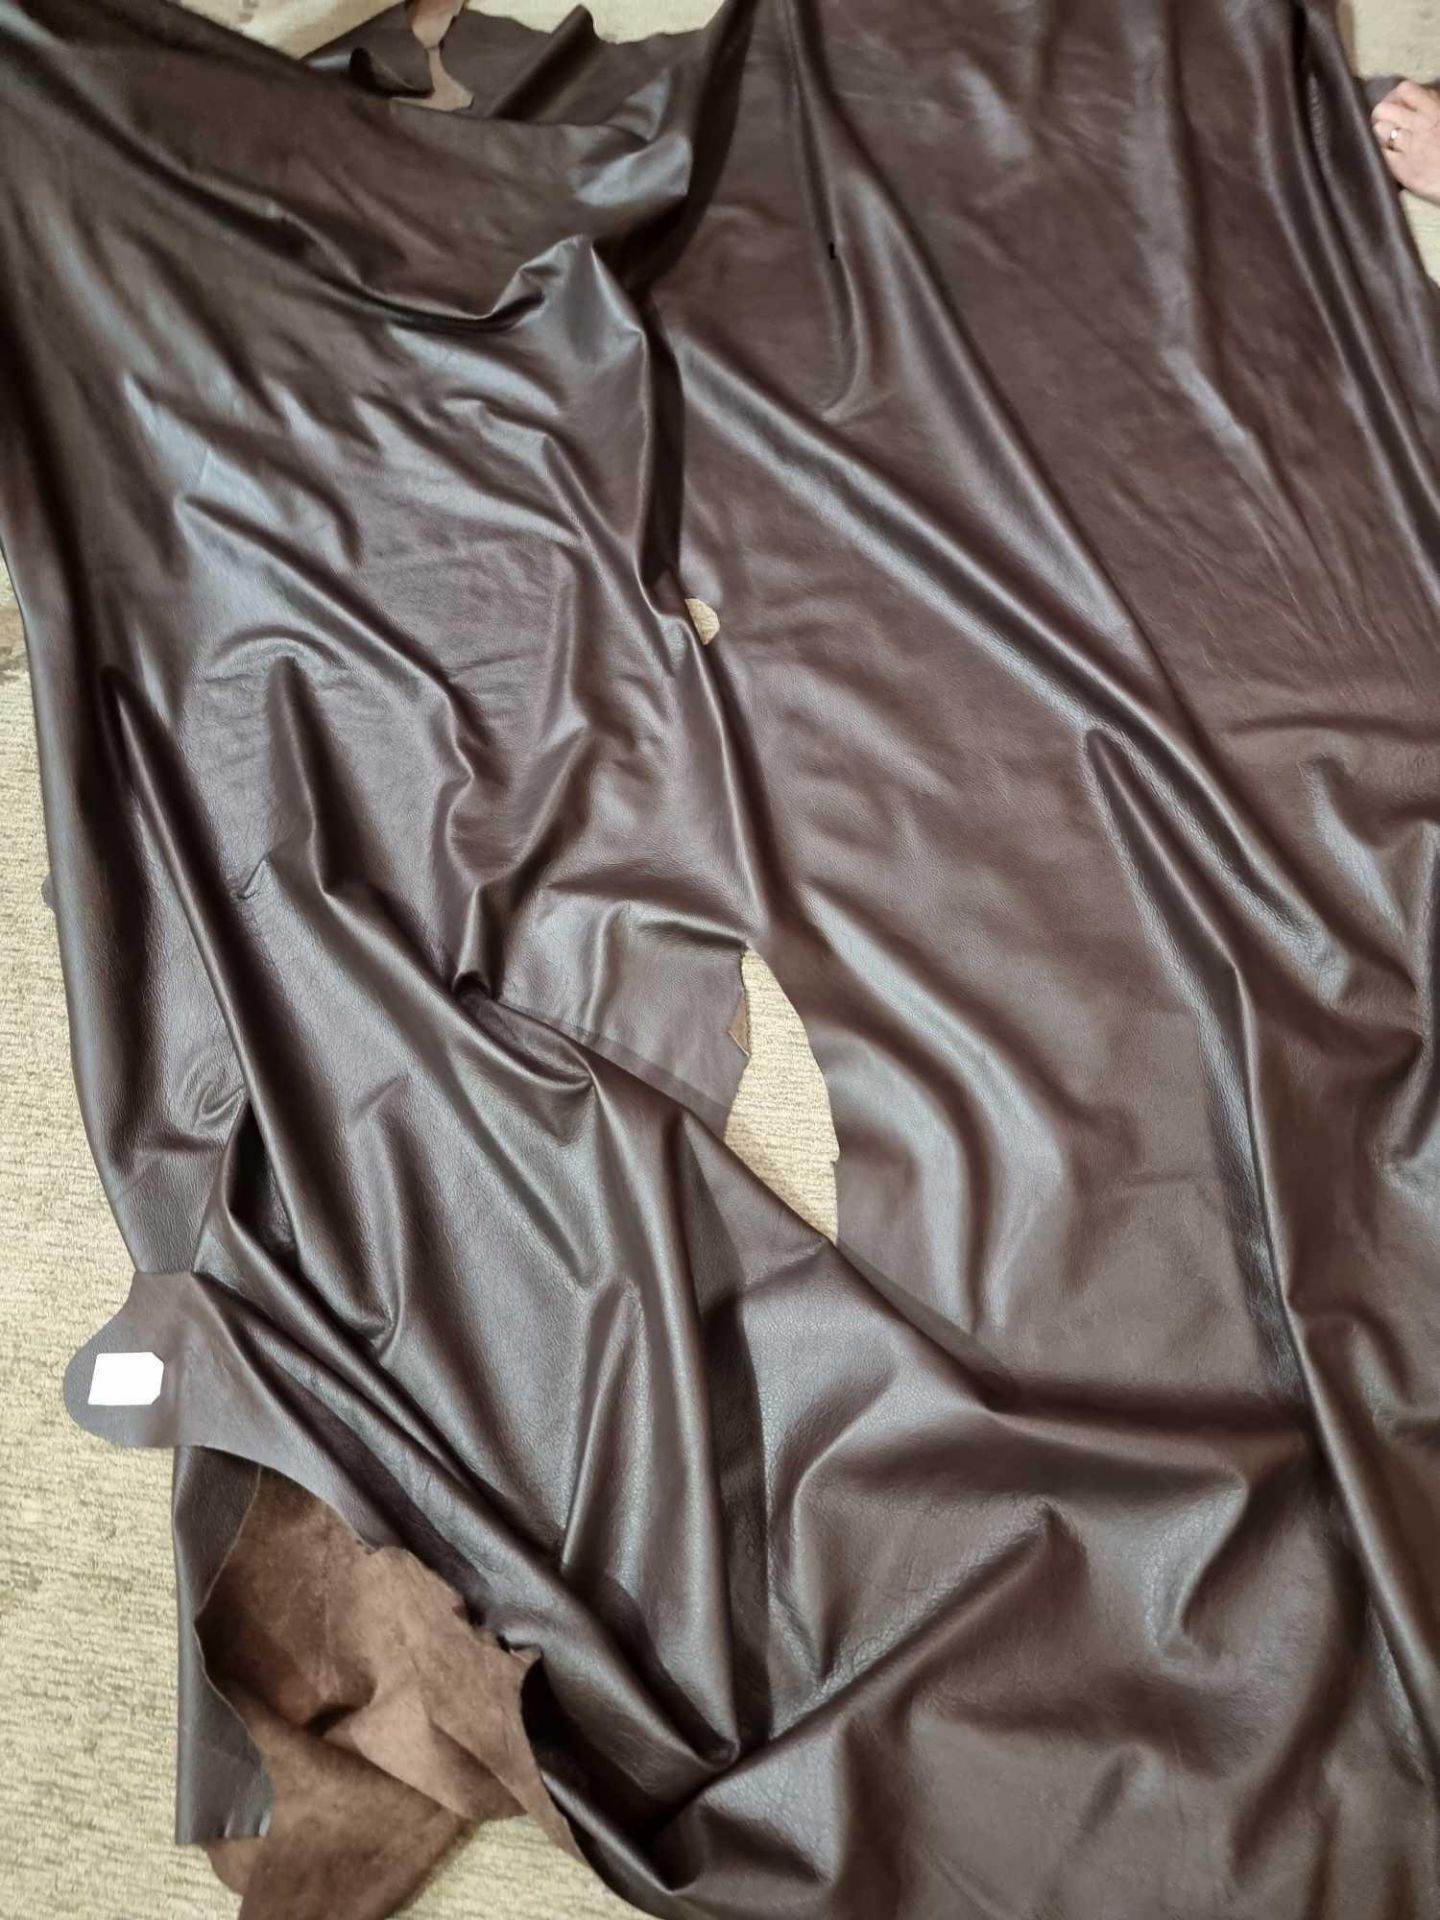 Mastrotto Hudson Chocolate Leather Hide approximately 4.75mÂ² 2.5 x 1.9cm - Image 2 of 2